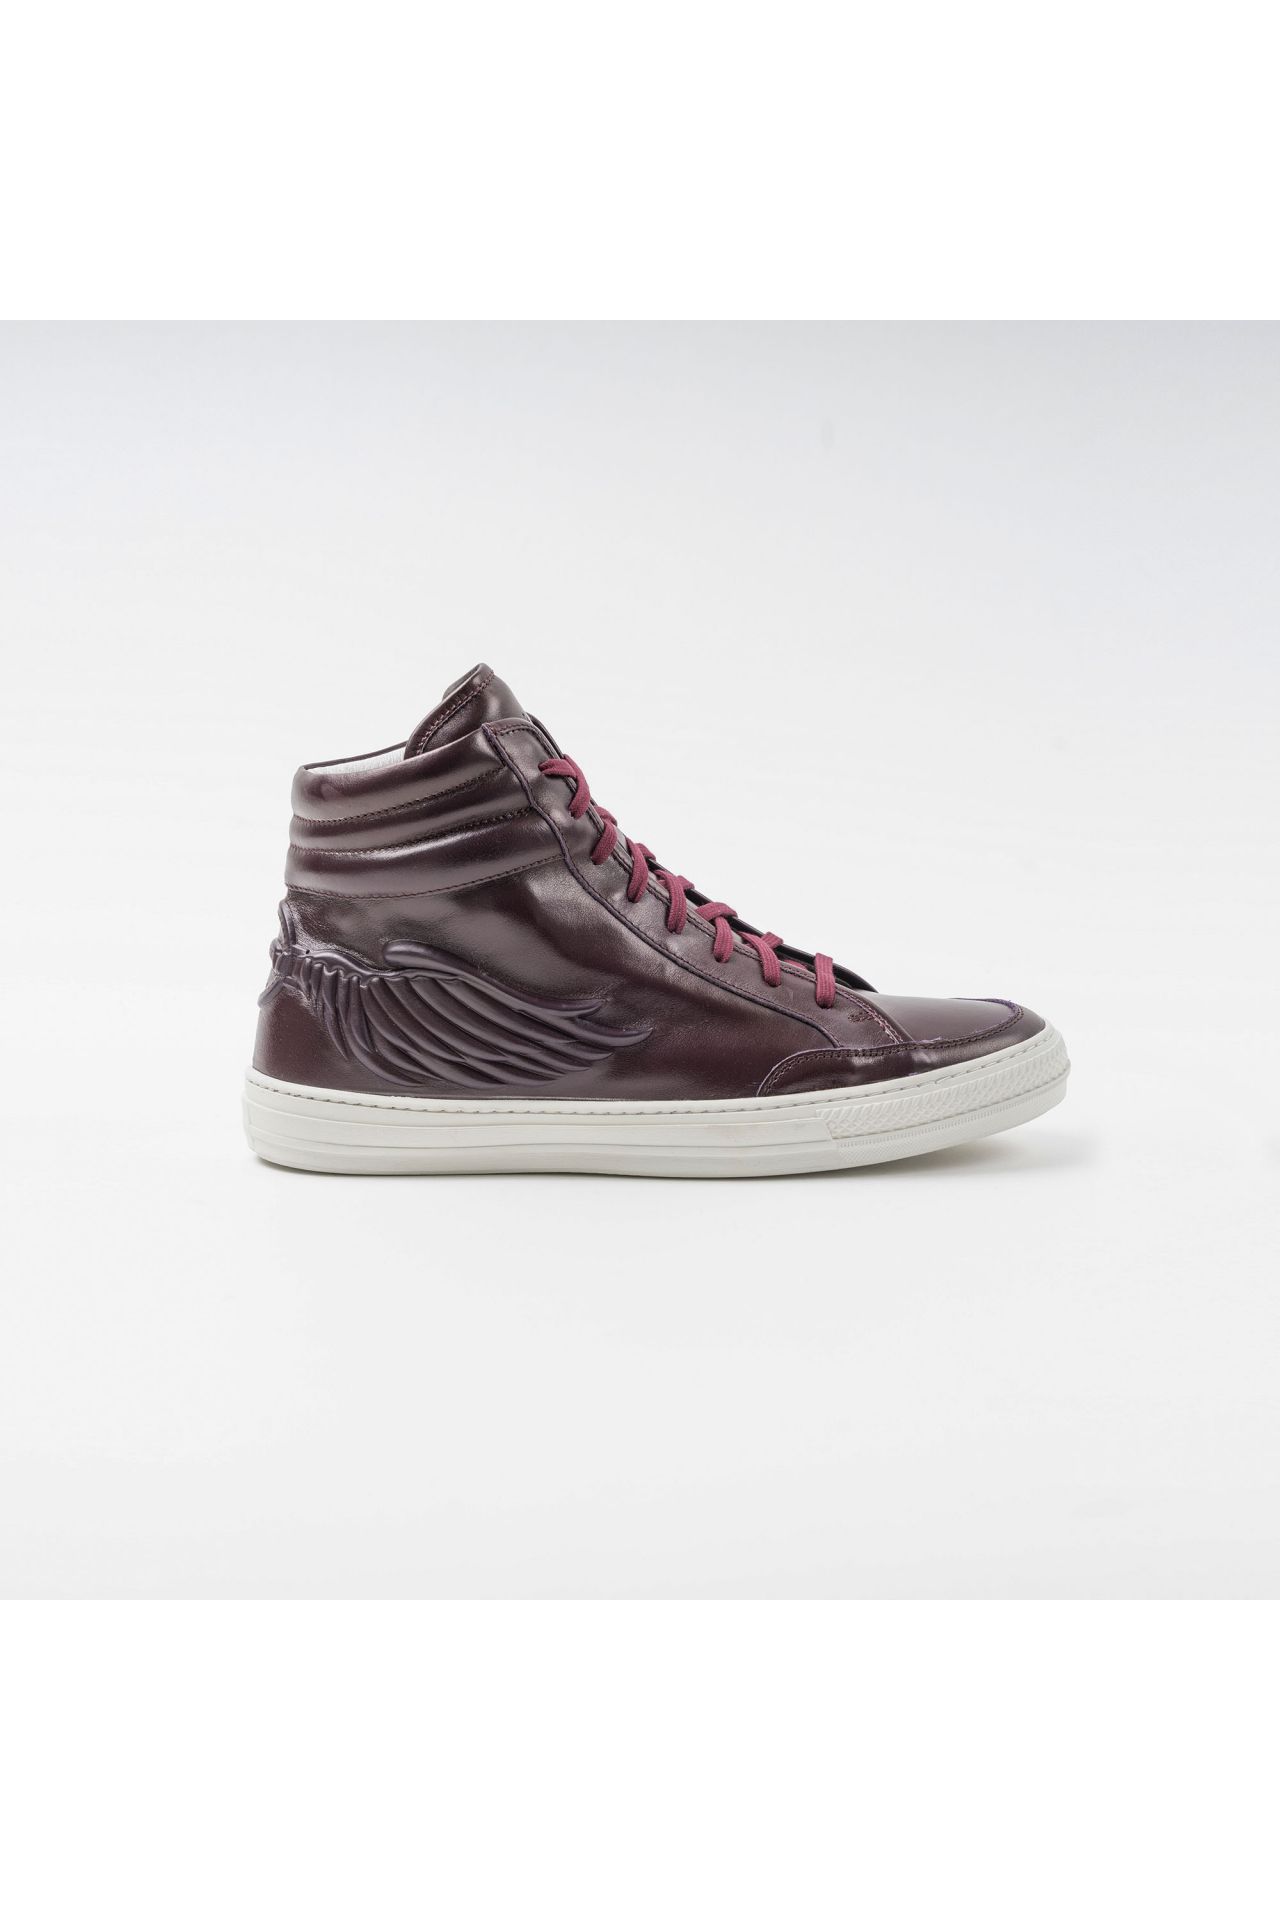 MENS HIGH TOP LAMINATED LEATHER SNEAKERS IN BURGUNDY